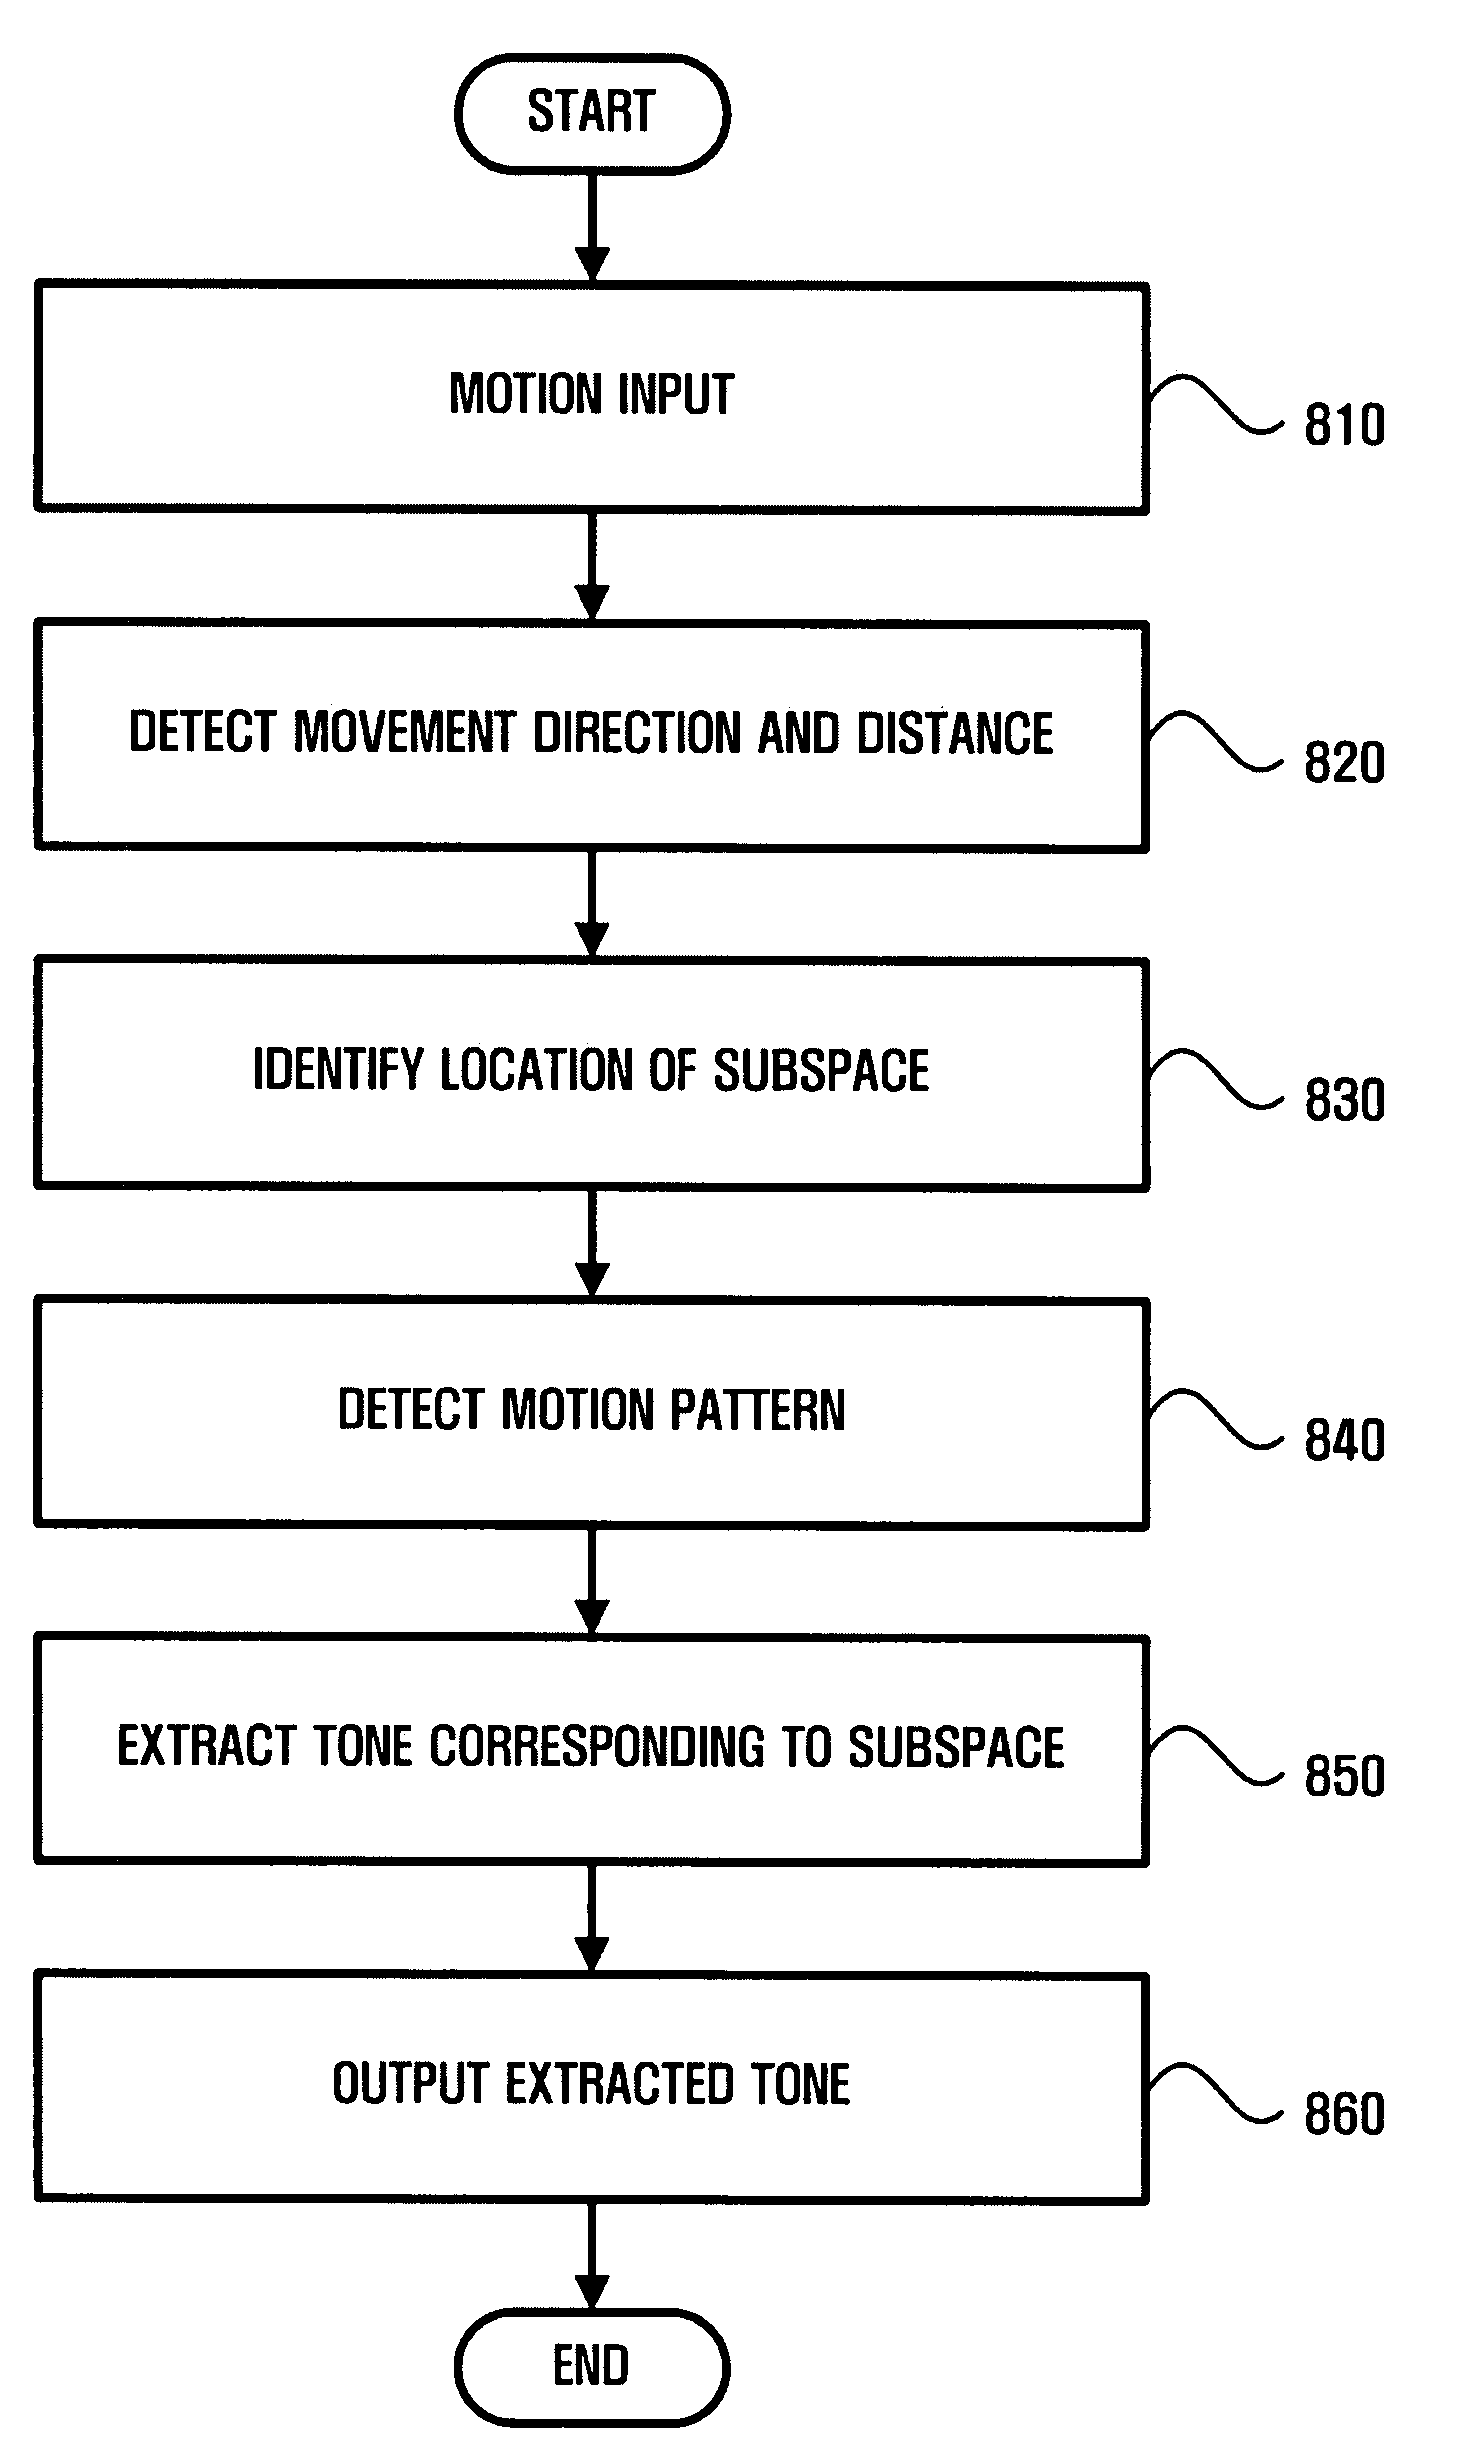 Apparatus and method for generating musical tone according to motion